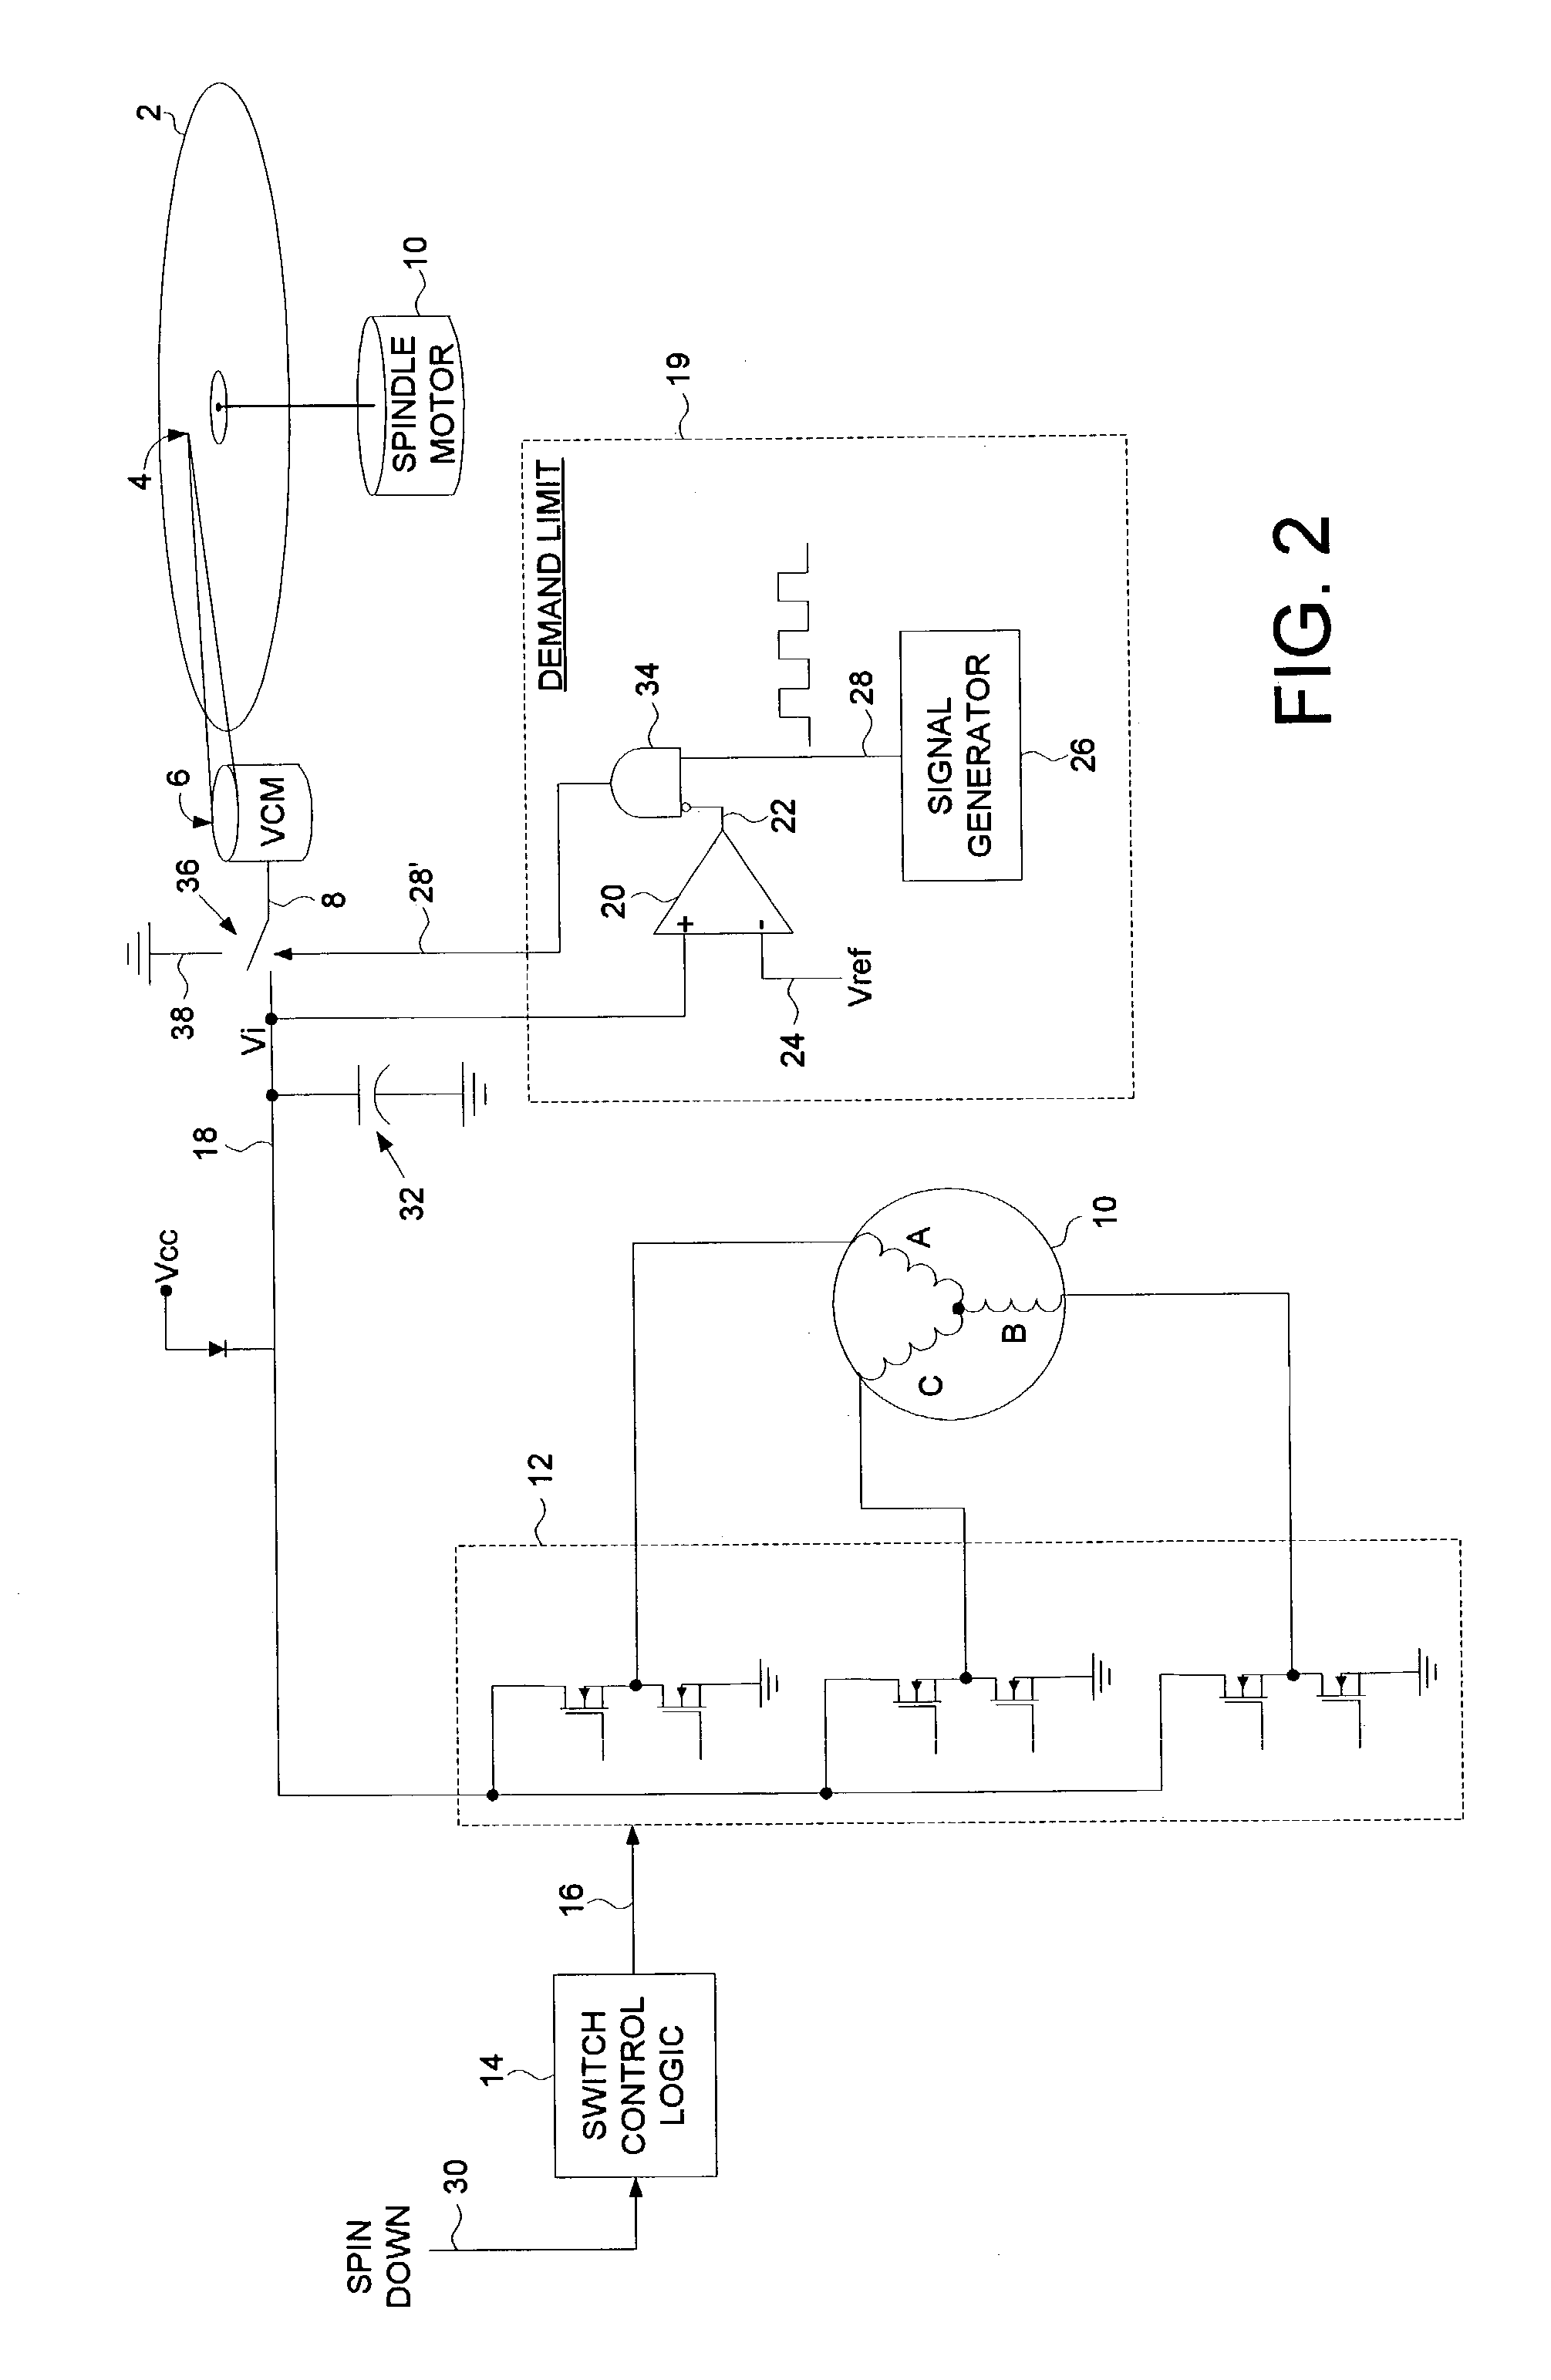 Disk drive comprising a pulse width modulated demand limit circuit for enhancing power management during spin-down